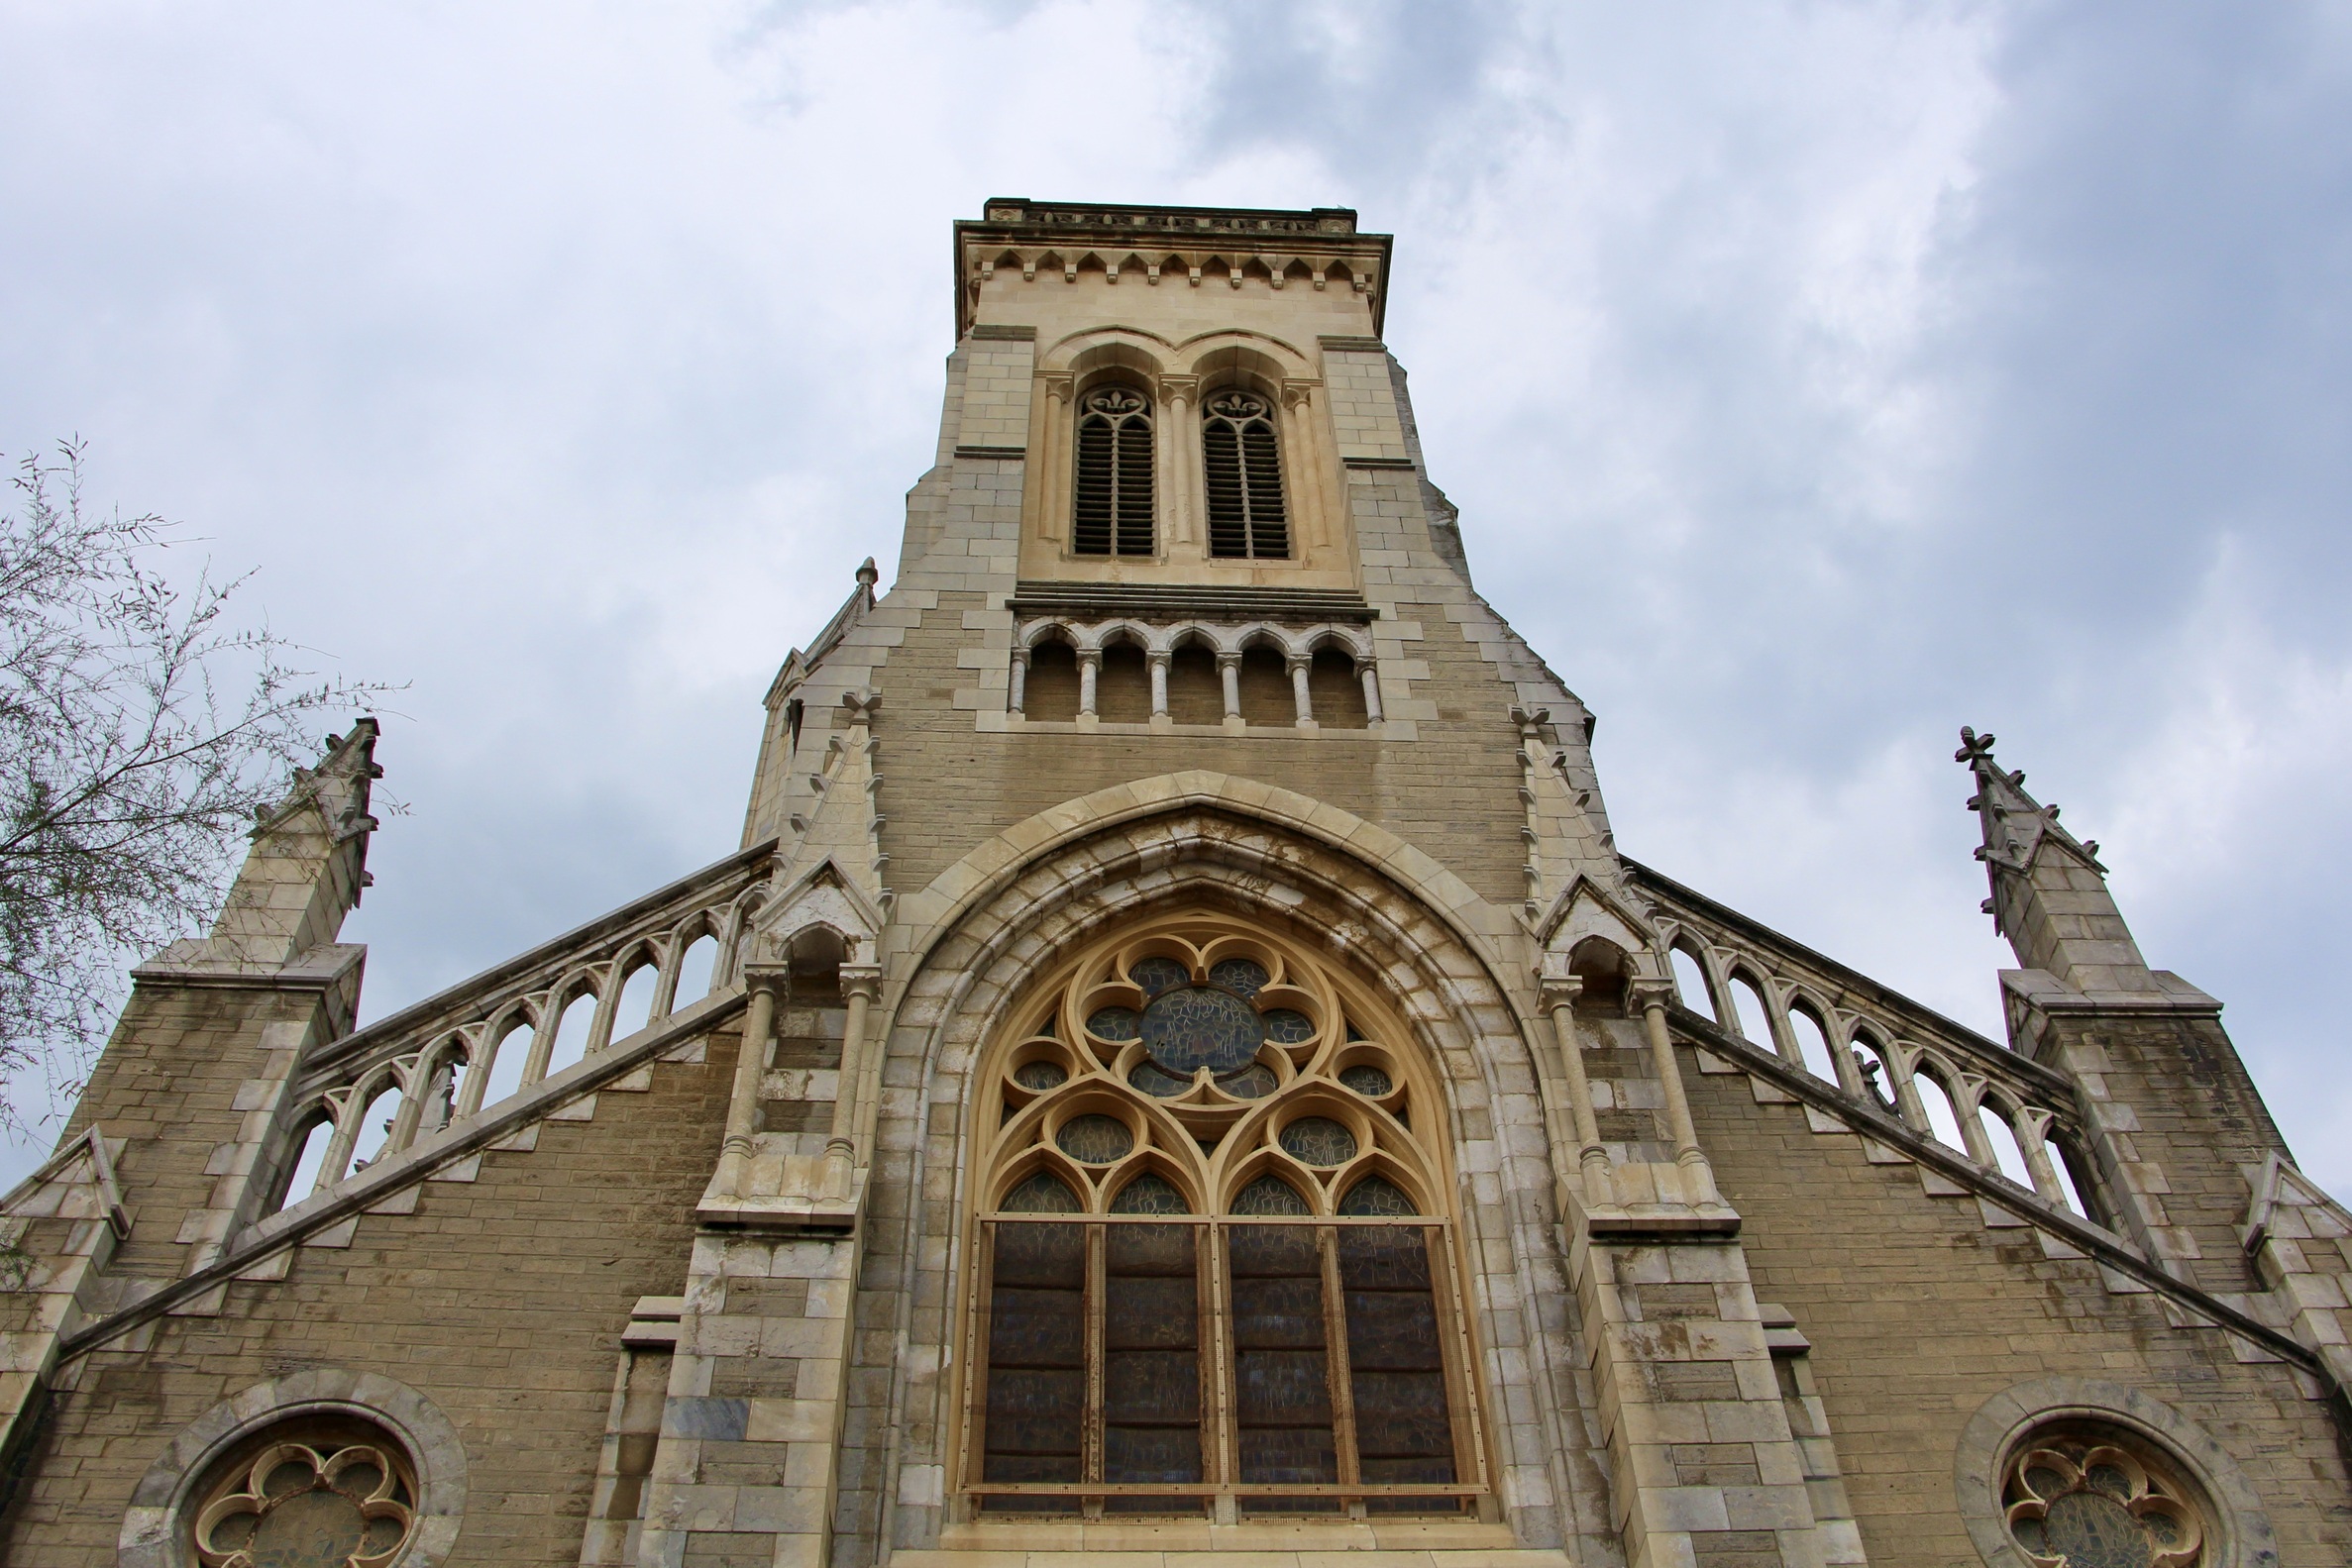 The exterior of the Église Sainte Eugénie in Biarritz, France.